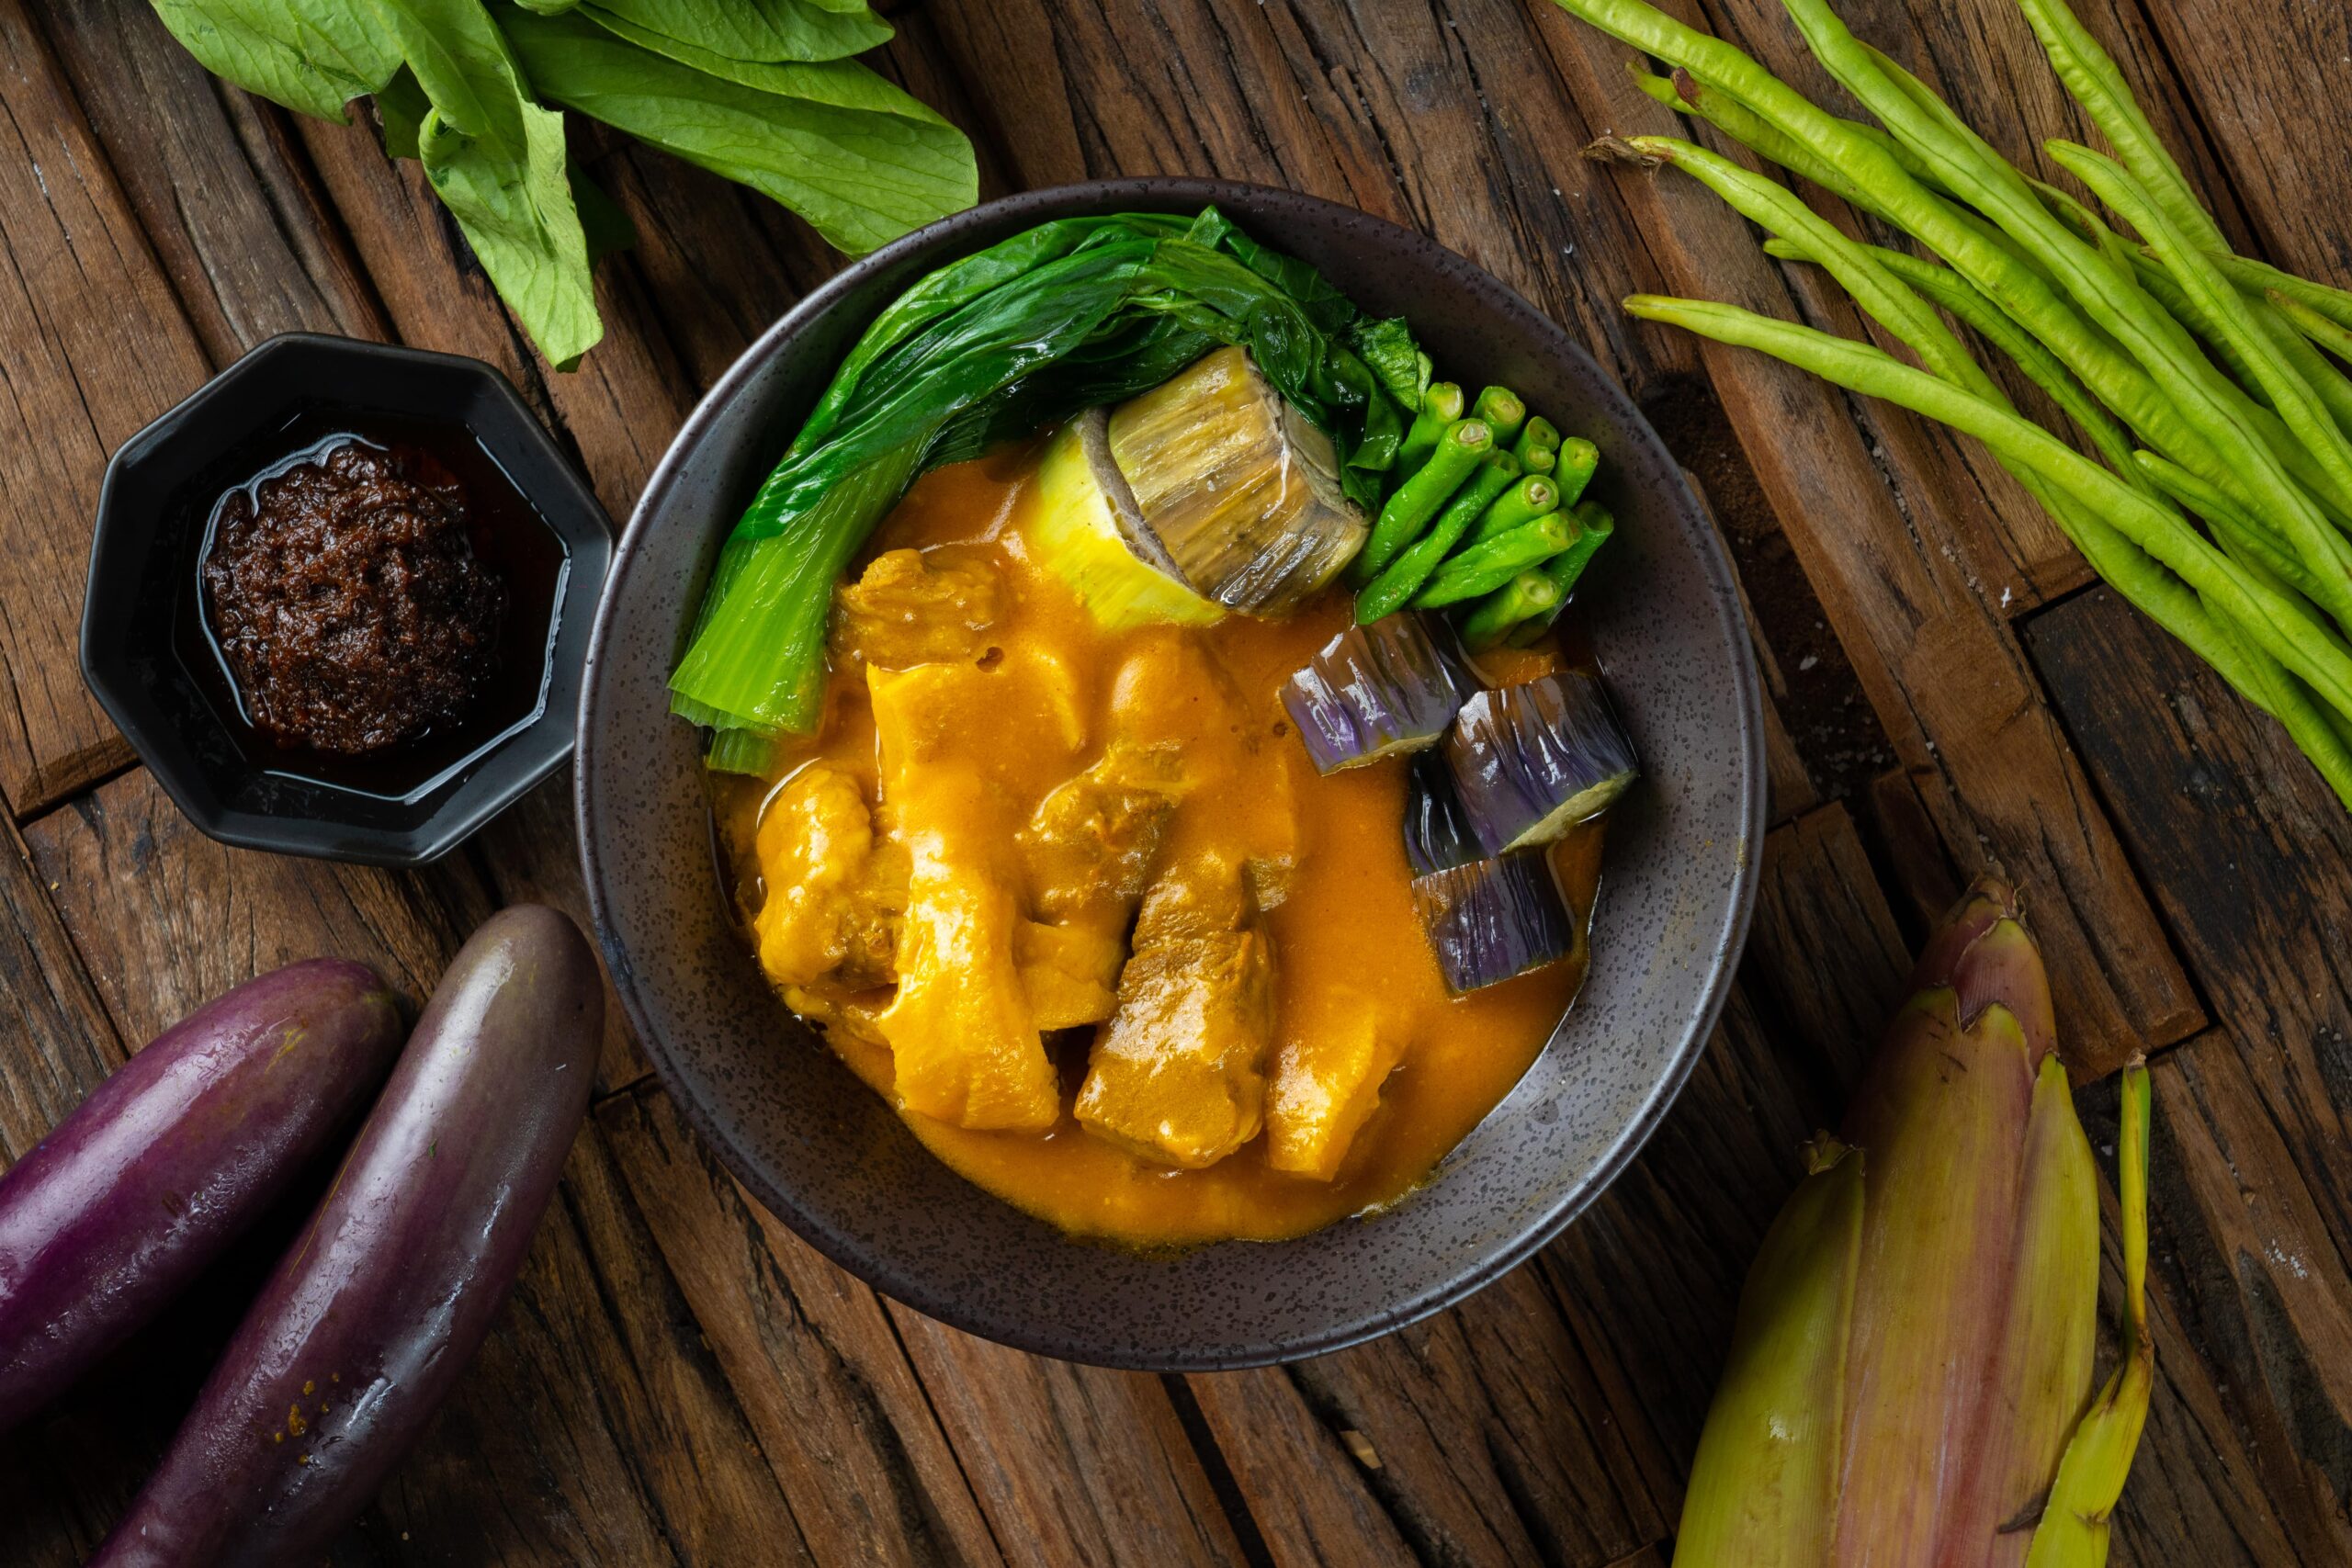 a Filipino-favorite dish with beef sirloin, ox tripe and vegetables in peanut sauce